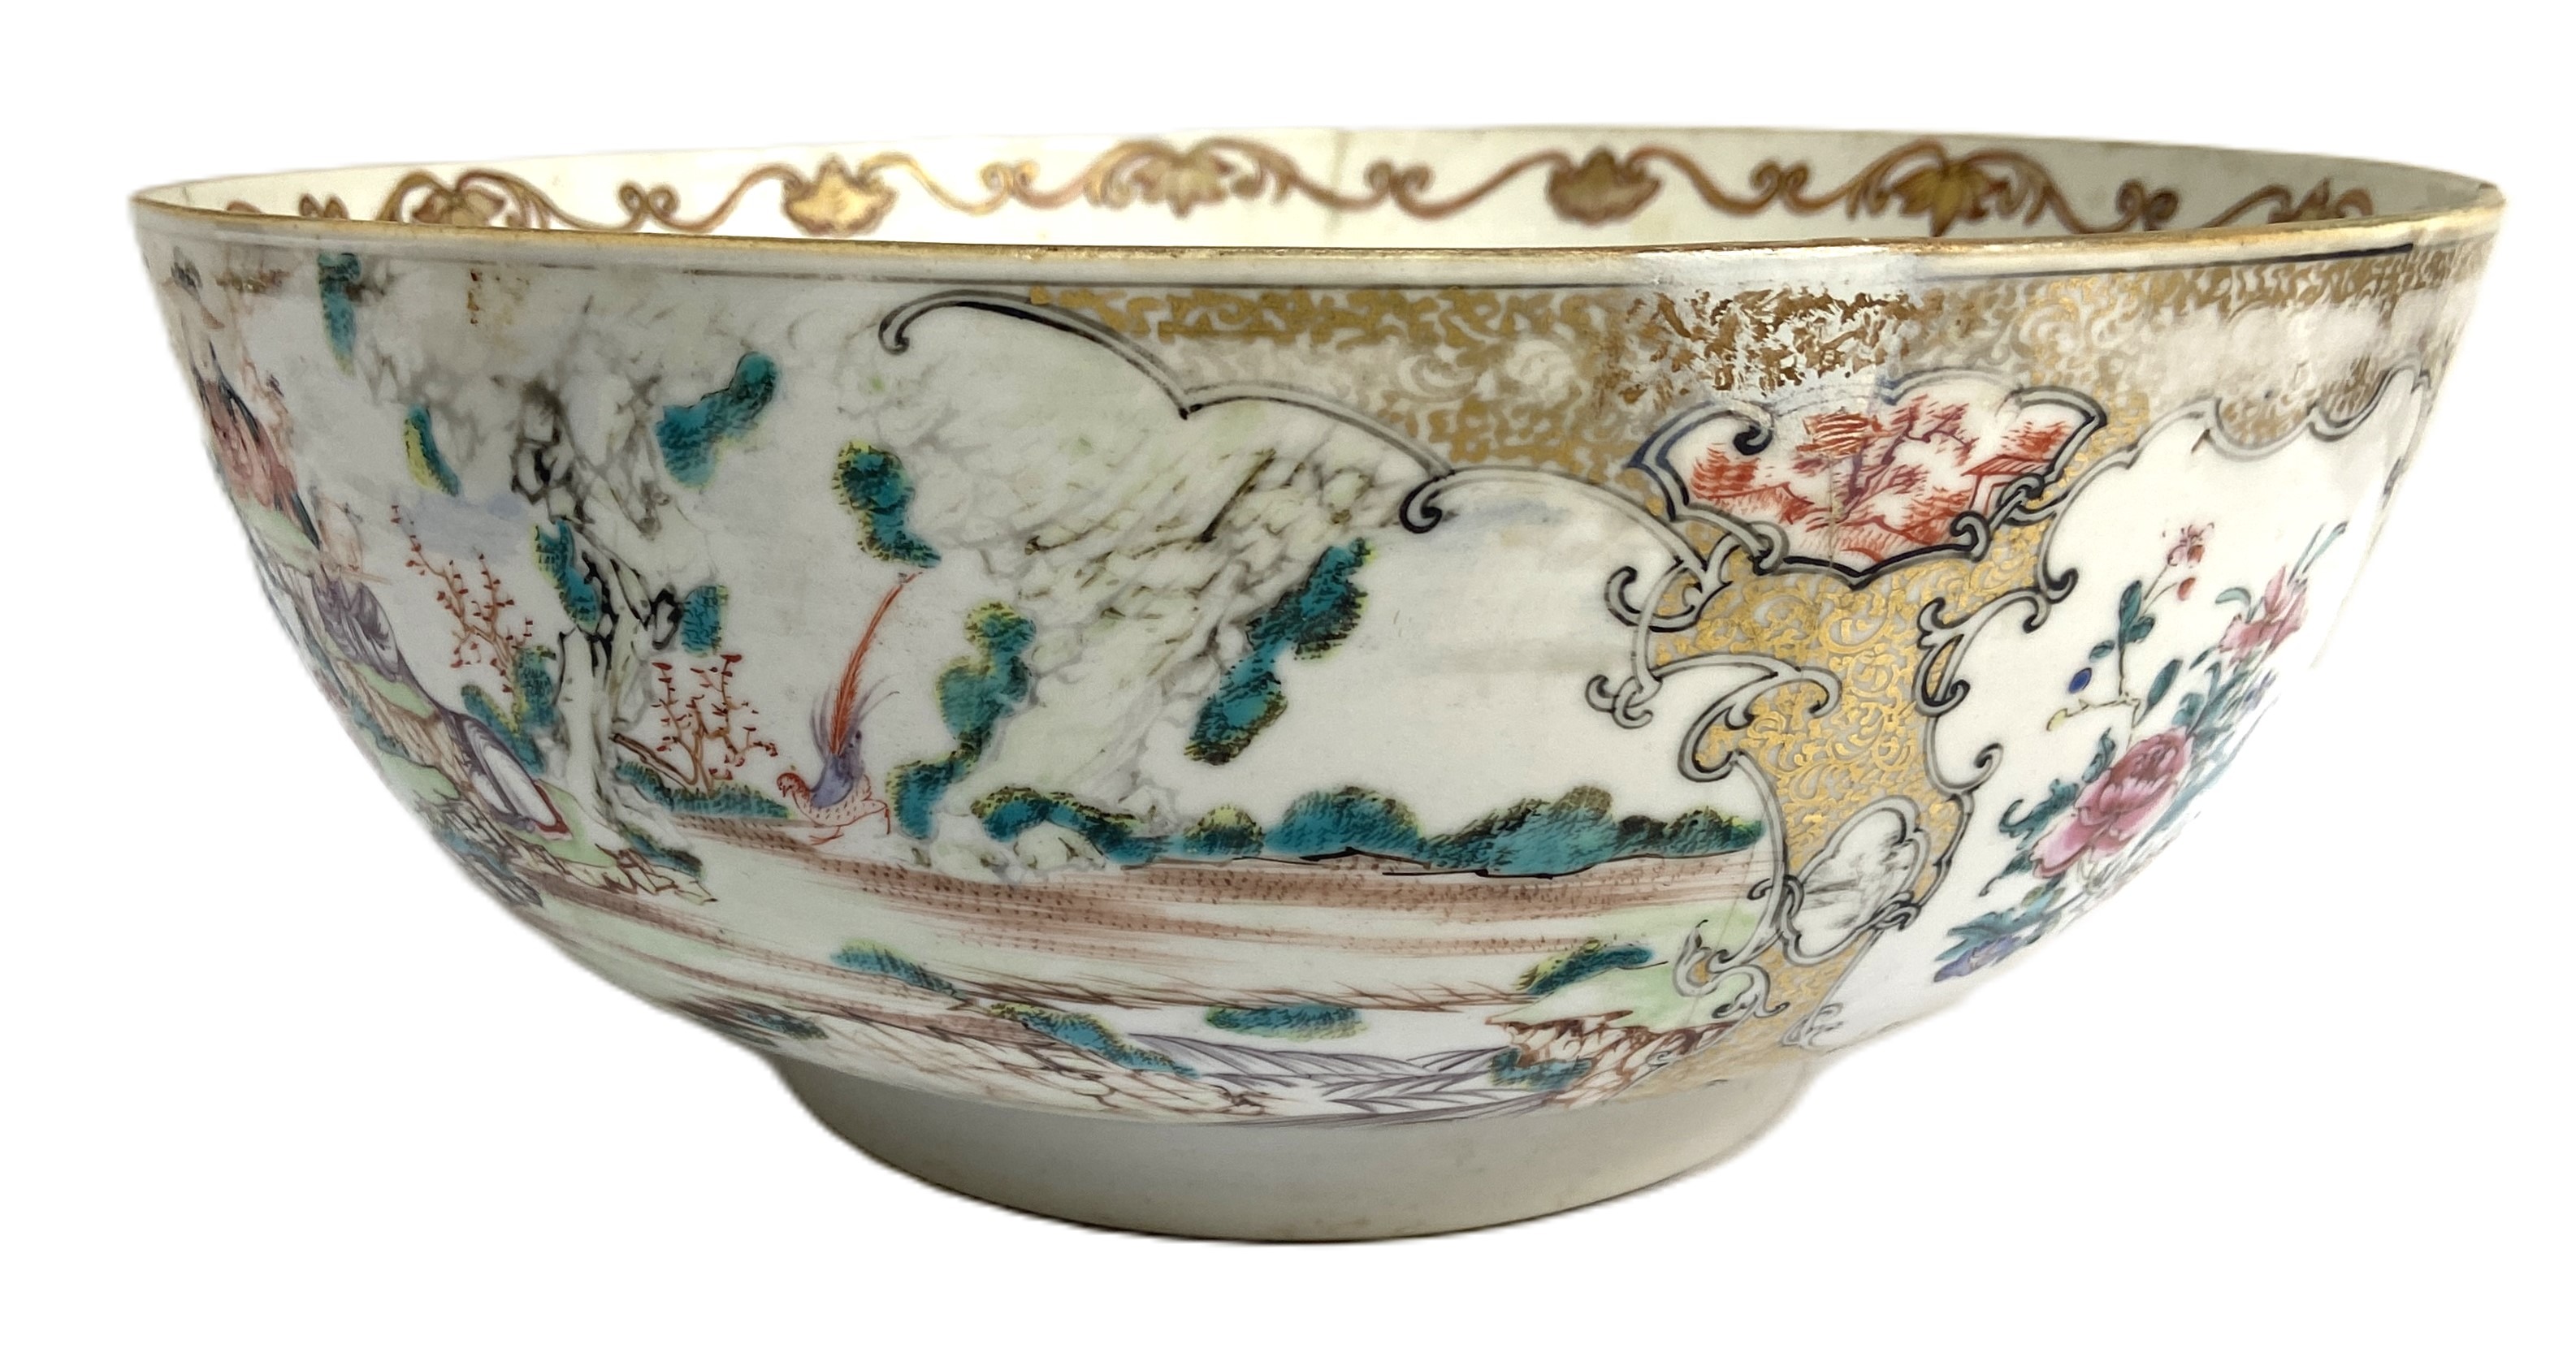 A Chinese export famille verte porcelain punch bowl, probably Qianlong, 18th century, decorated with - Image 2 of 7